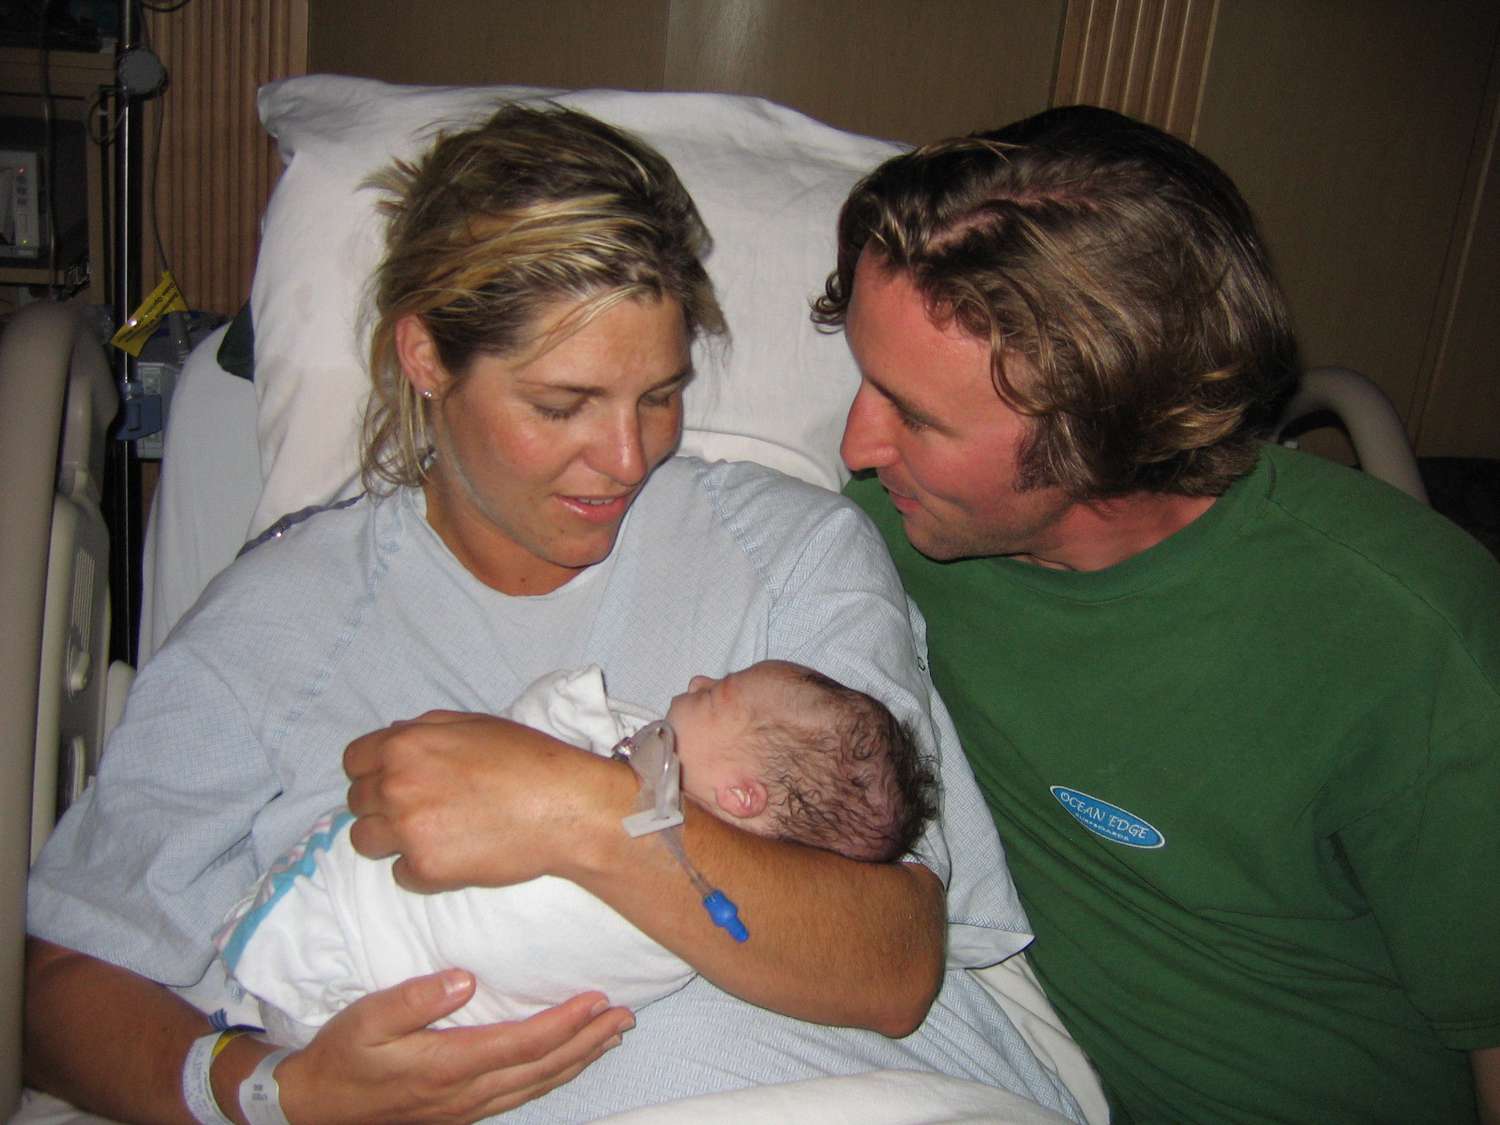 Hilary Achauer holds her child after giving birth.